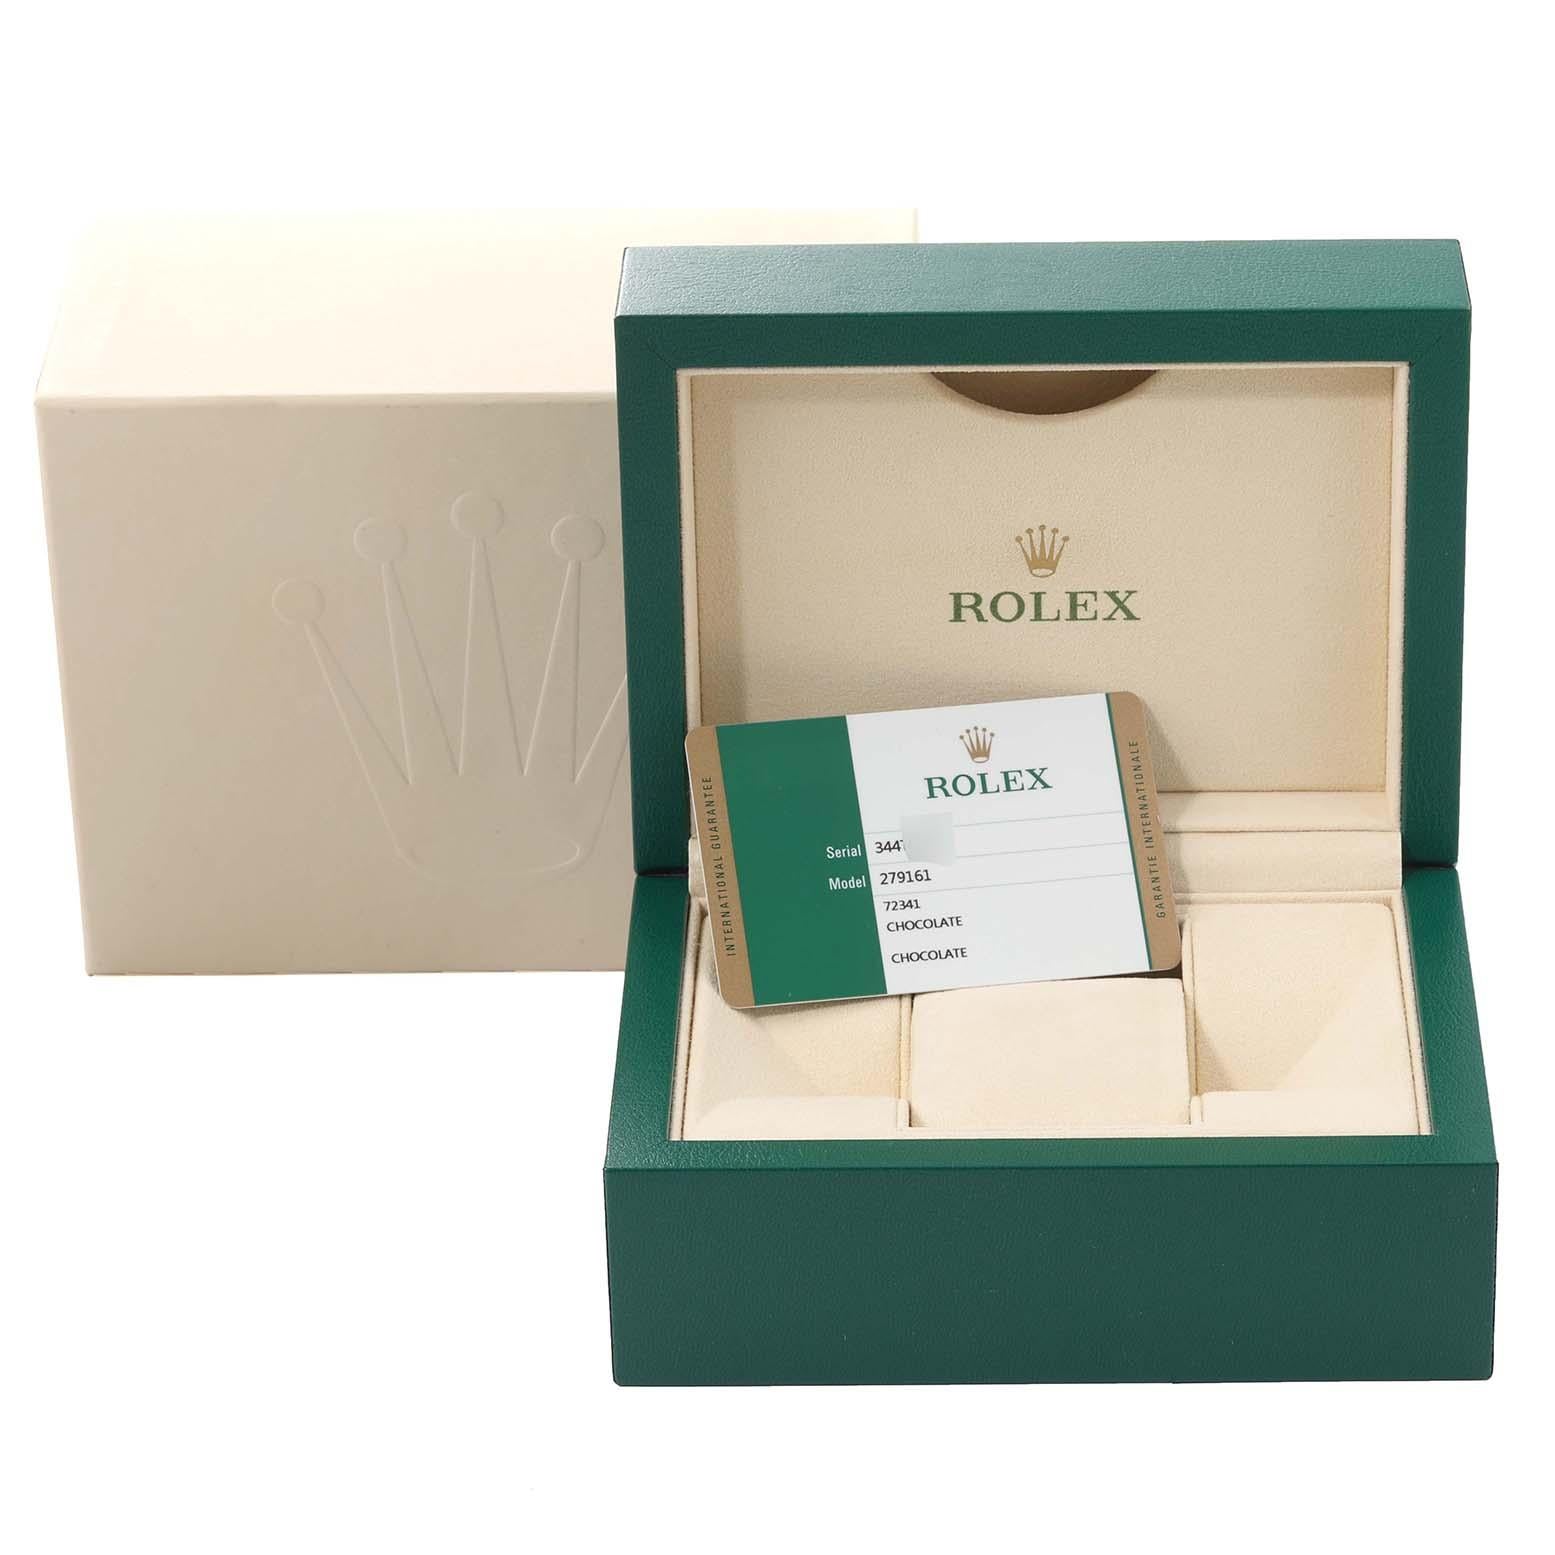 Rolex Datejust Steel Rose Gold Brown Dial Ladies Watch 279161 Box Card For Sale 7